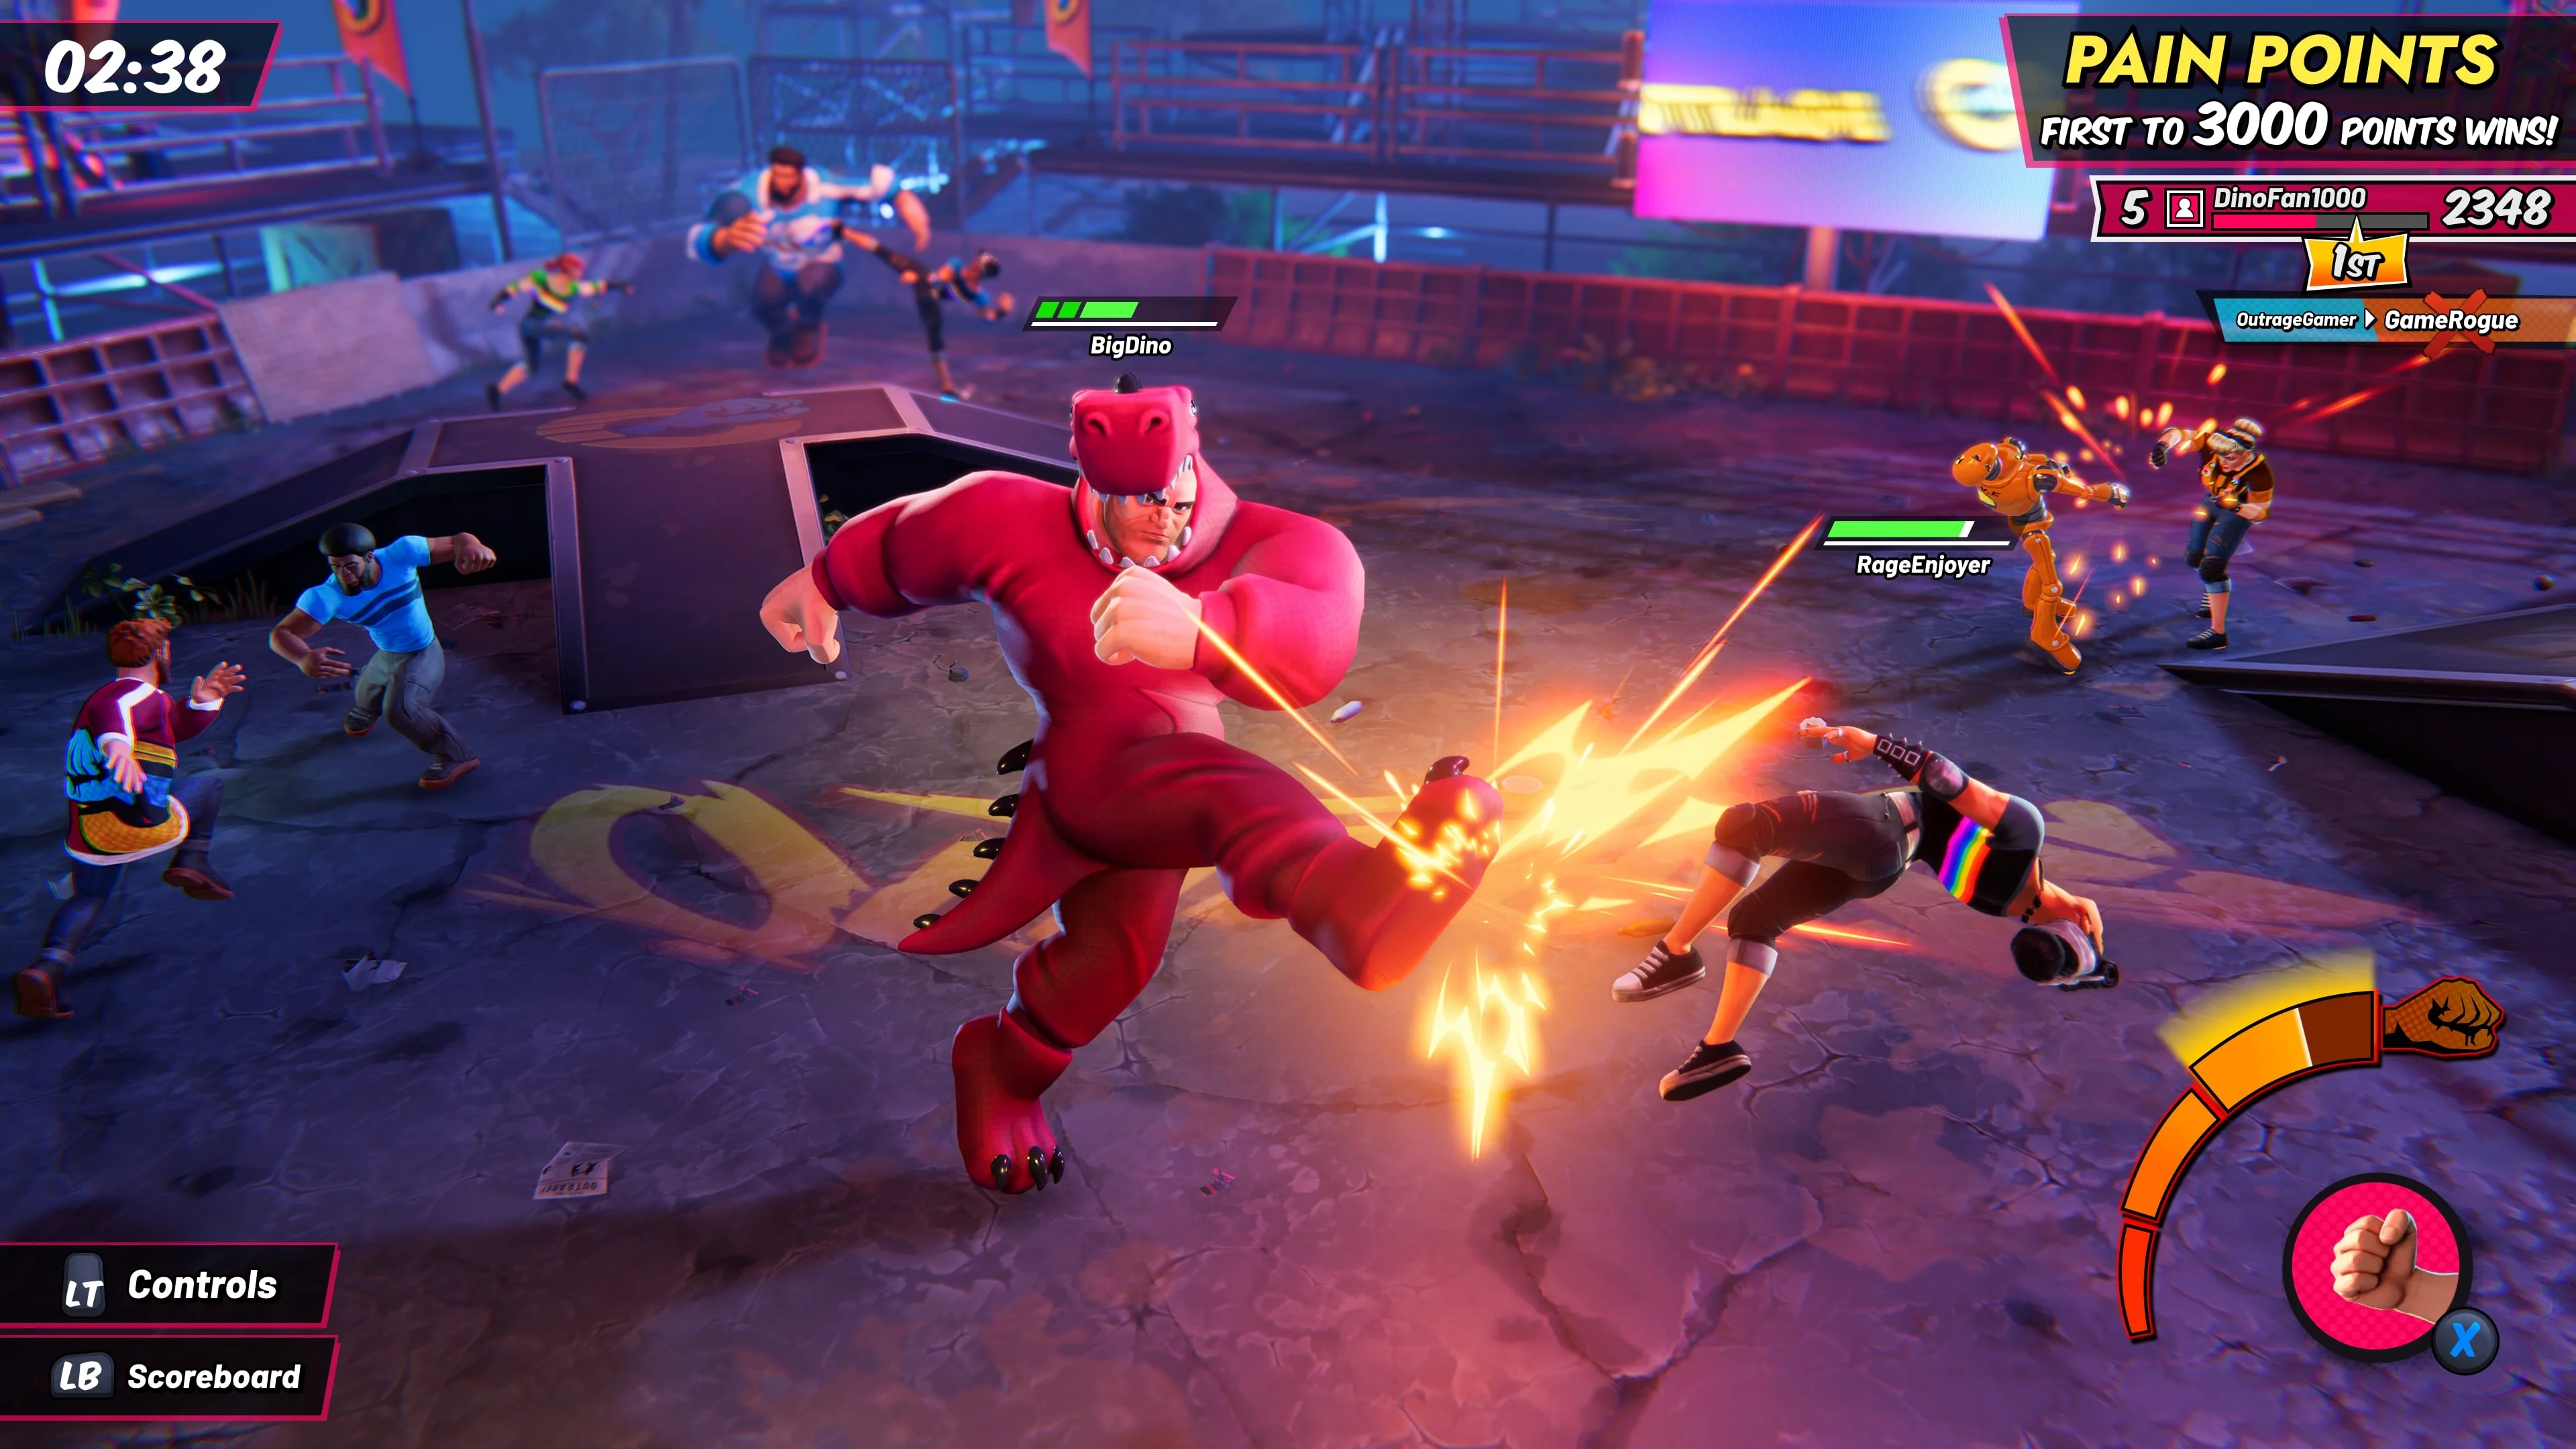 A screenshot from a game centring a large, male character in a pink dinosaur costume kicking a smaller character named. In the background are several other characters fighting.